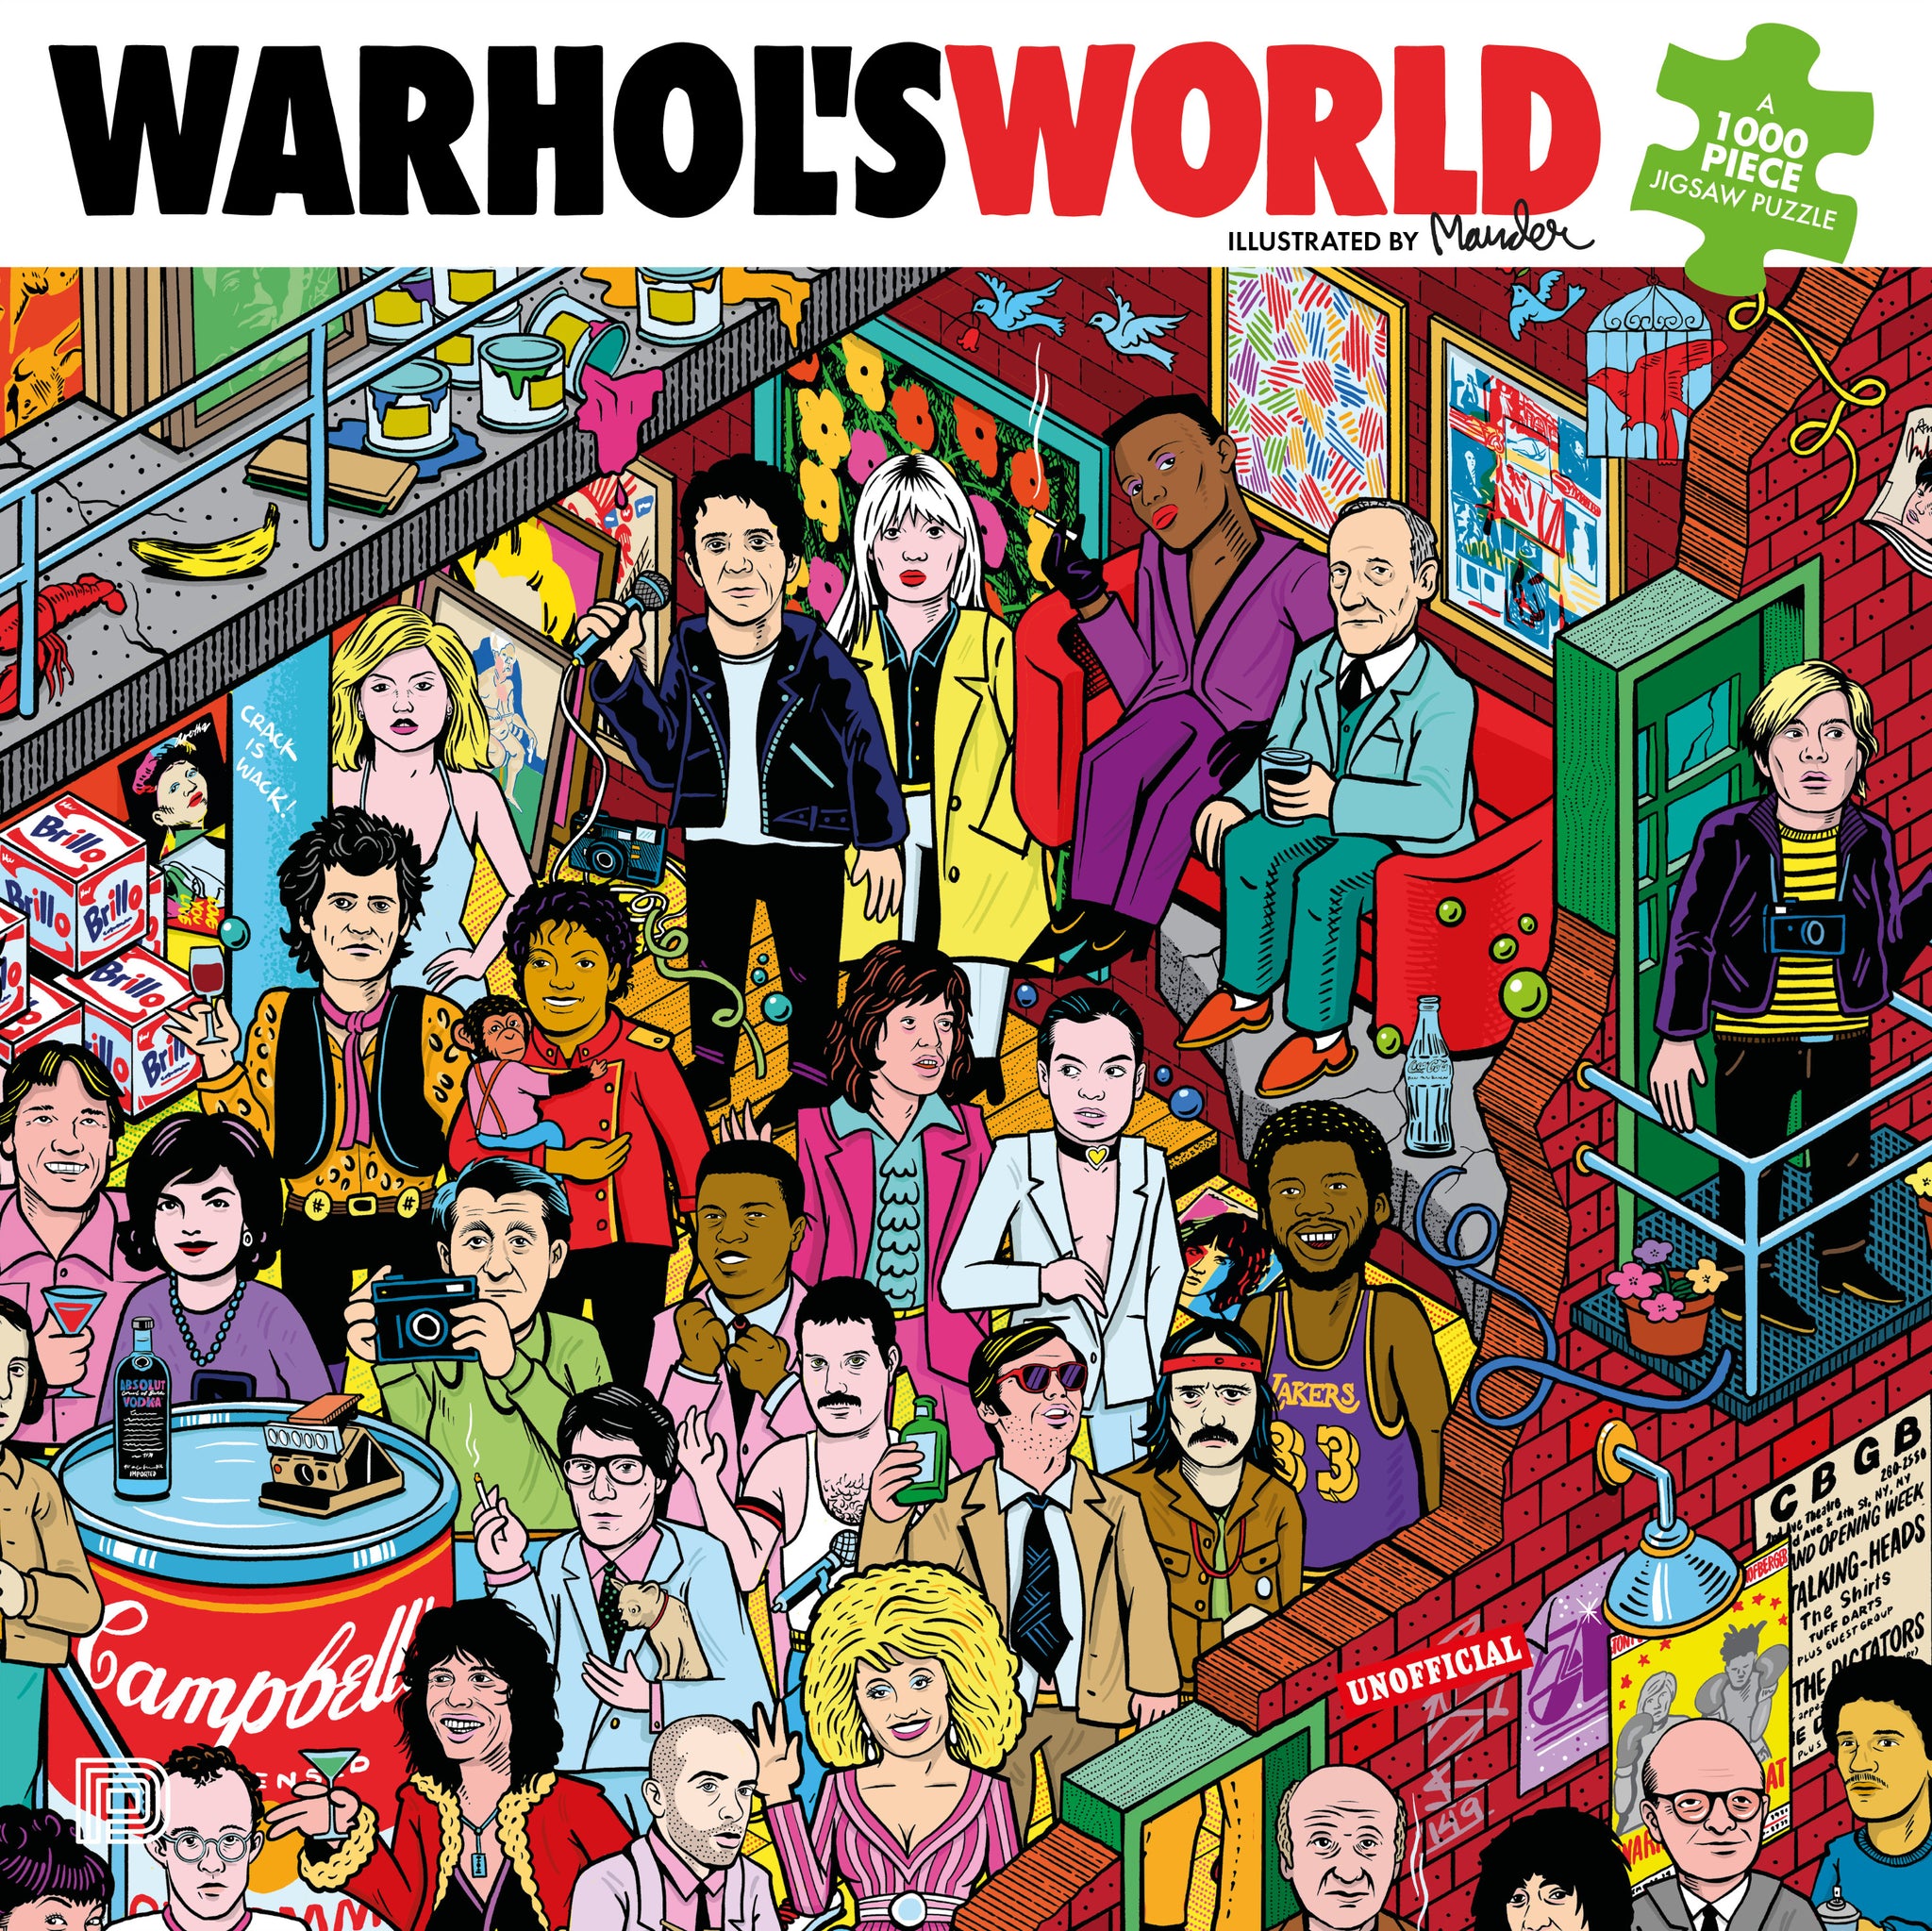 Warhol's World: 1000 Piece Puzzle cover